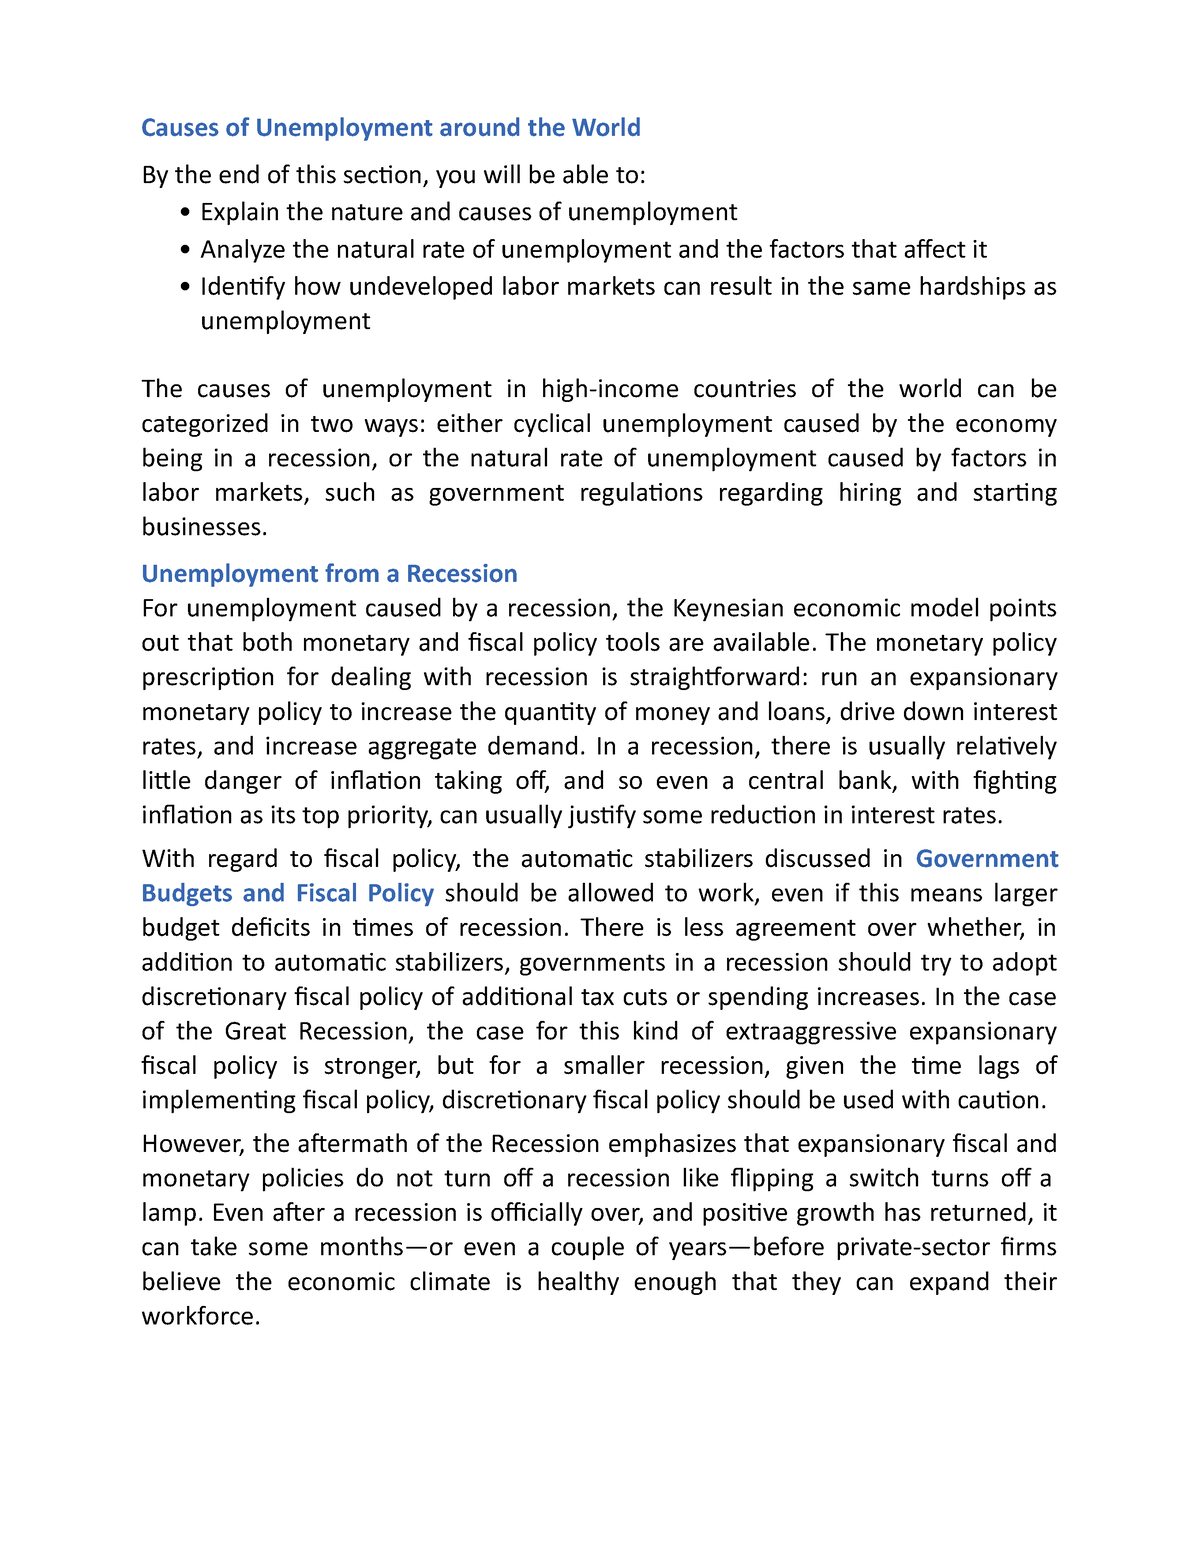 essay on causes of unemployment around the world